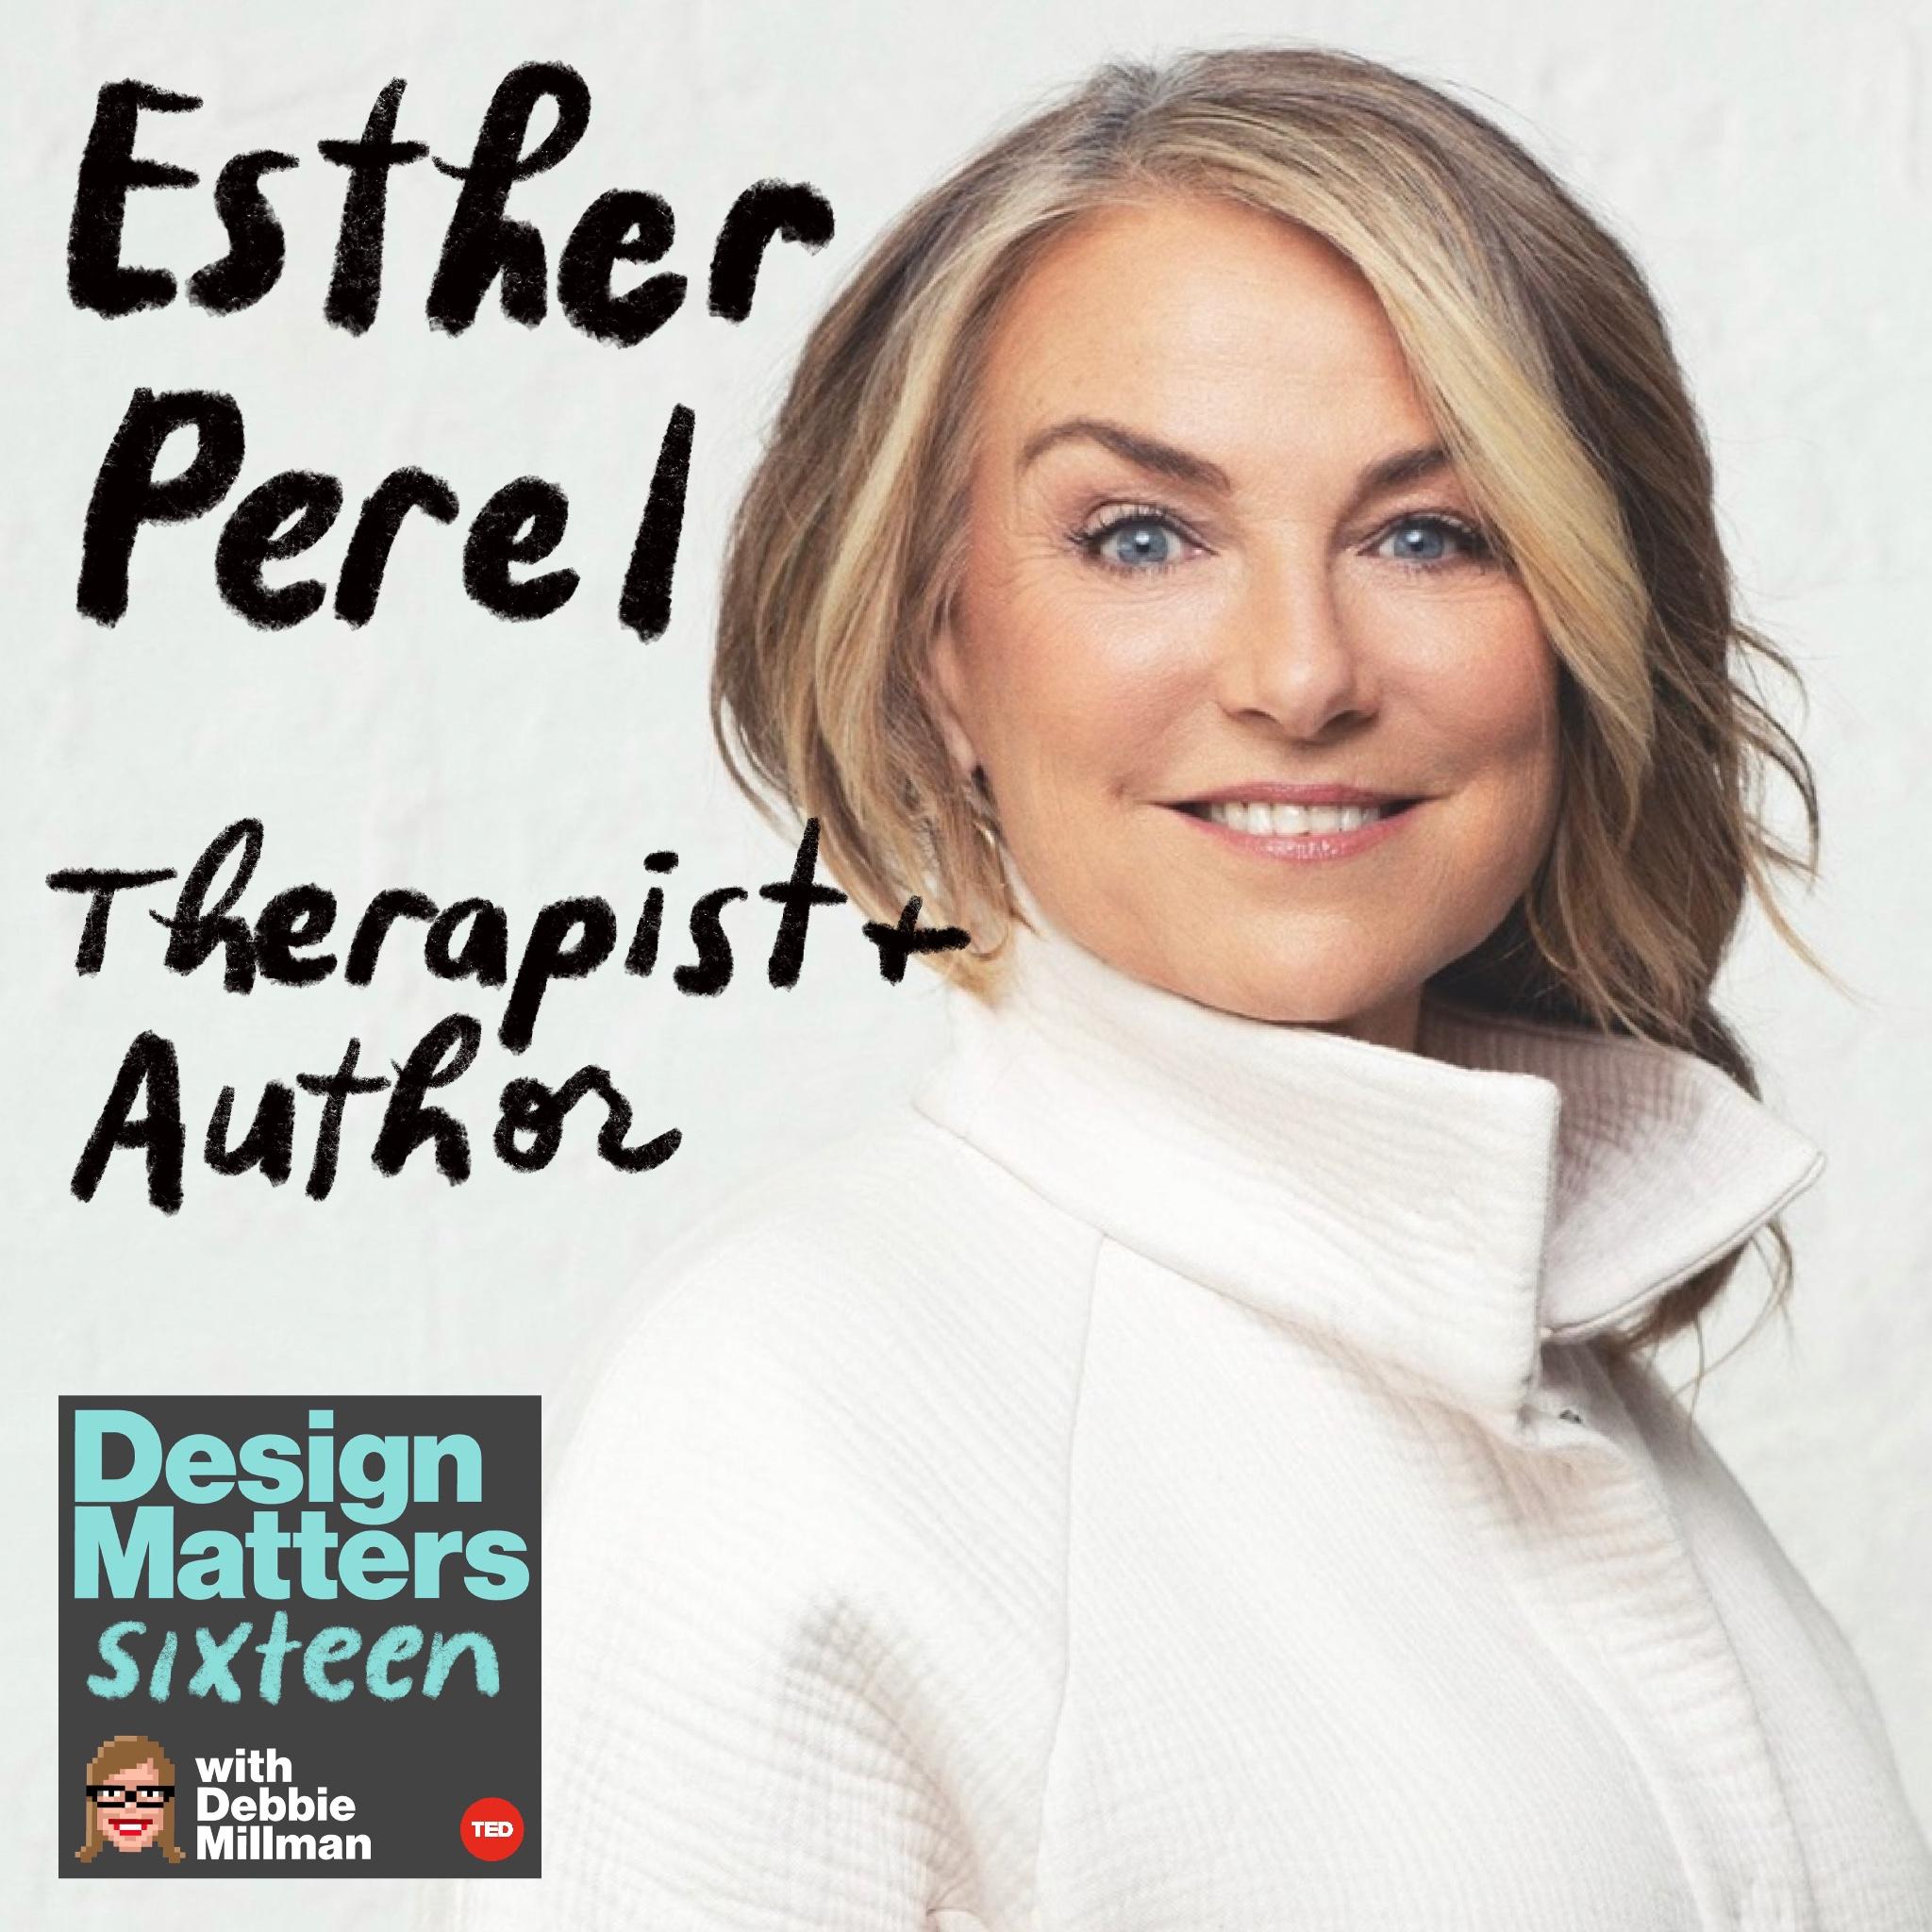 Thumbnail for "Design Matters From the Archive: Esther Perel".